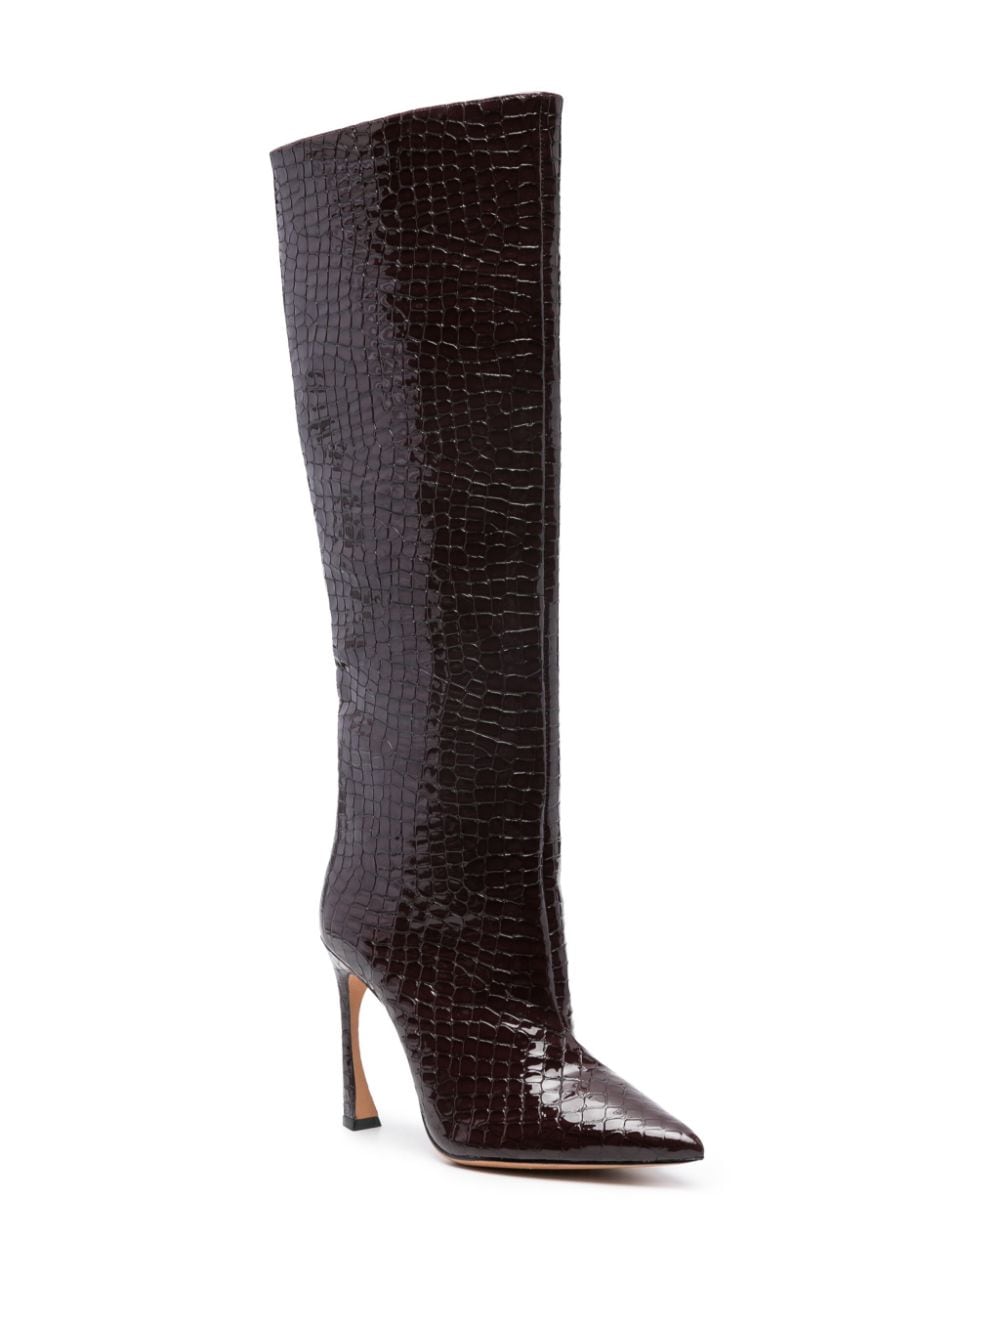 Image 2 of Alexandre Birman Kyra 100mm embossed leather boots